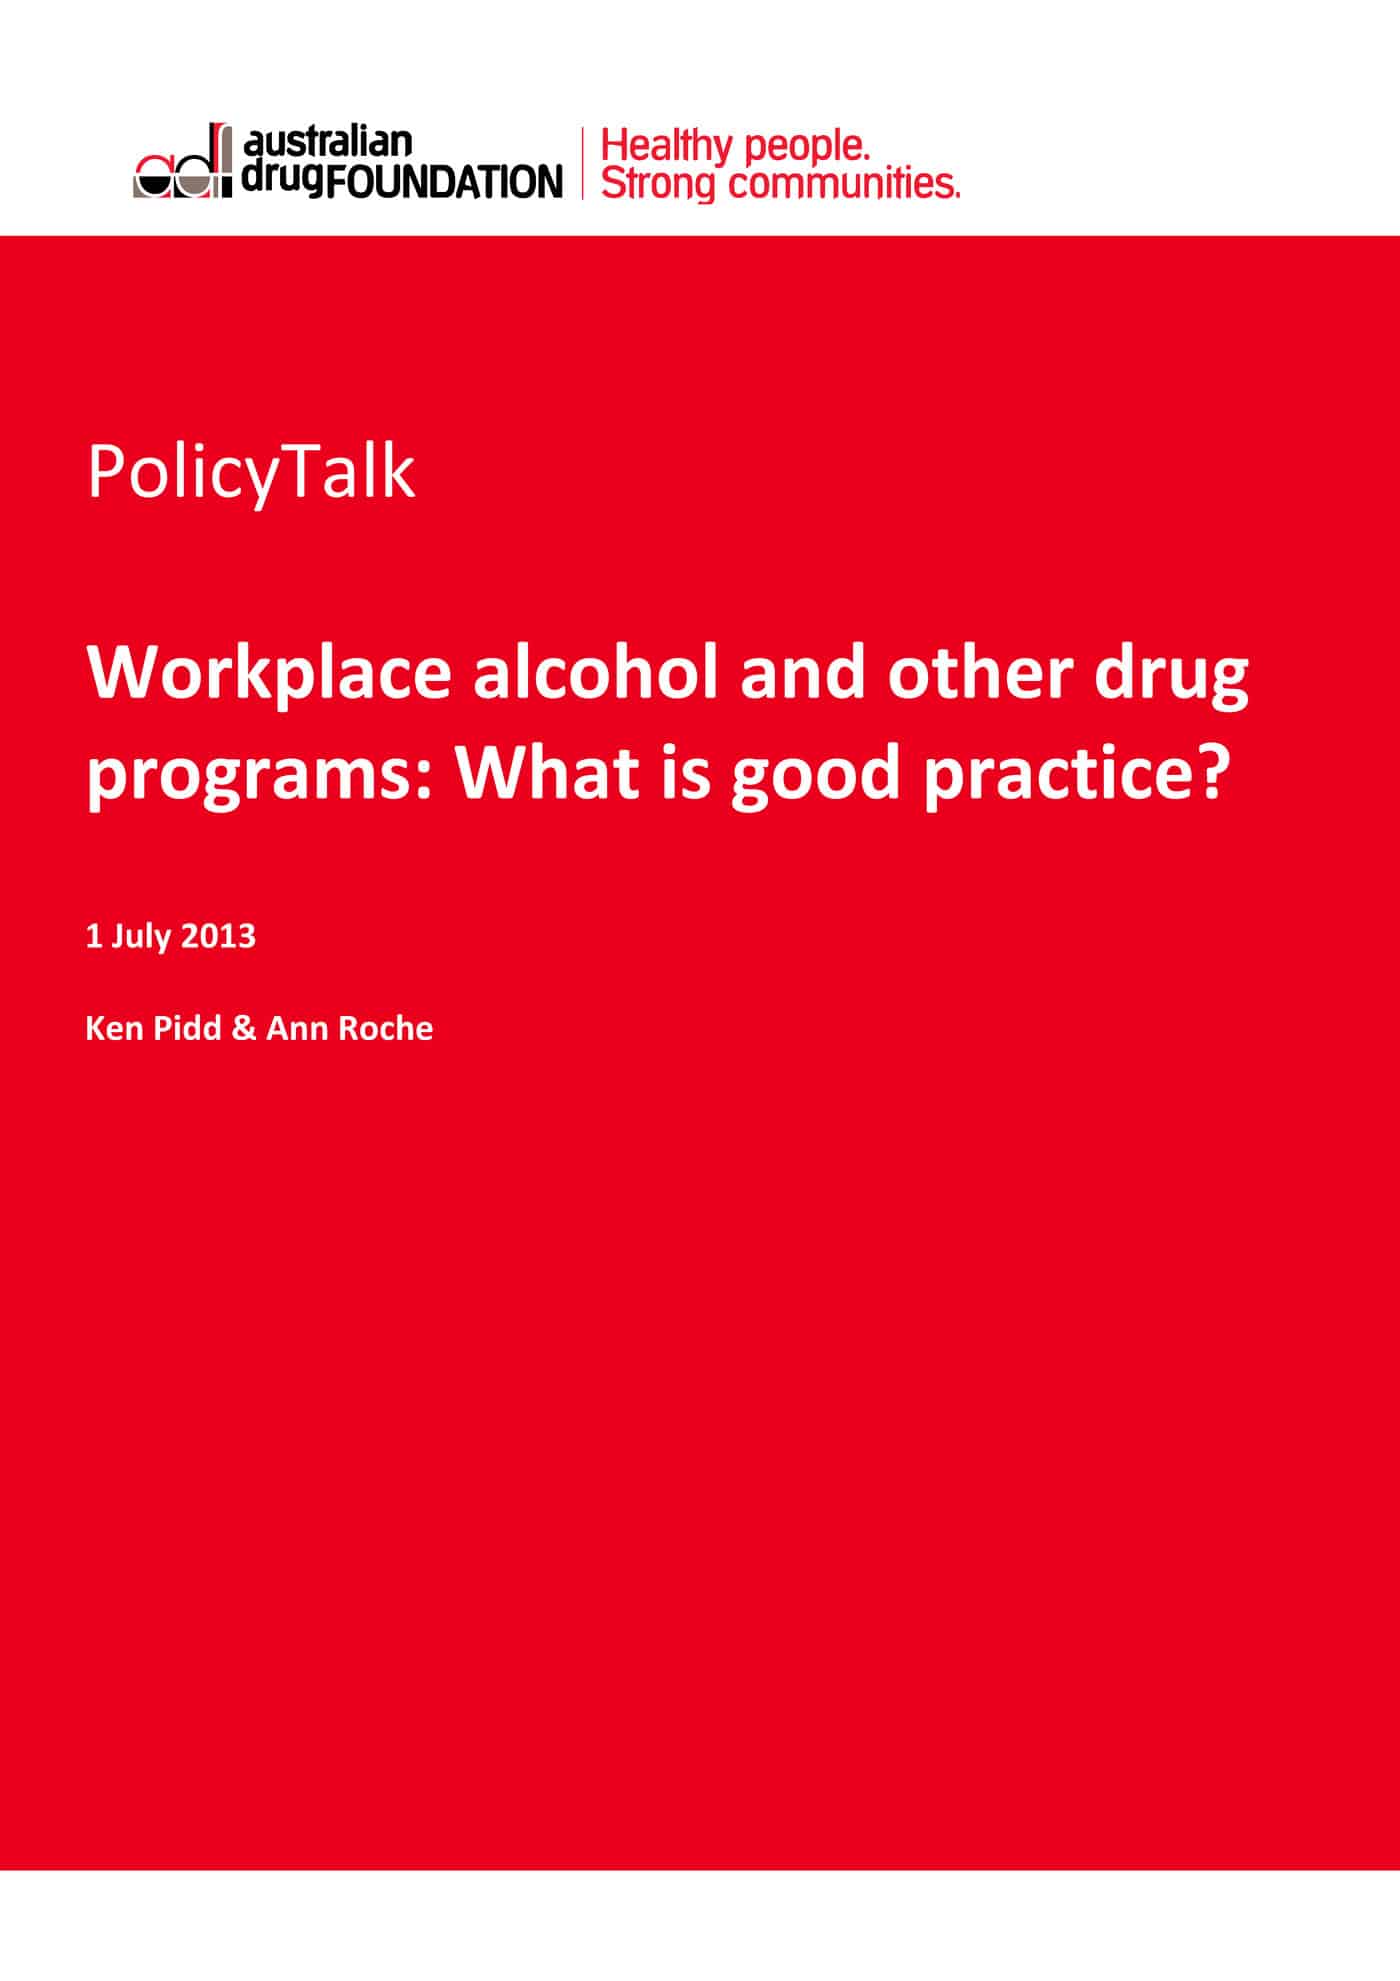 Pages from policy talk - workplace alcohol and other drug programs - australian drug foundation - july 2013